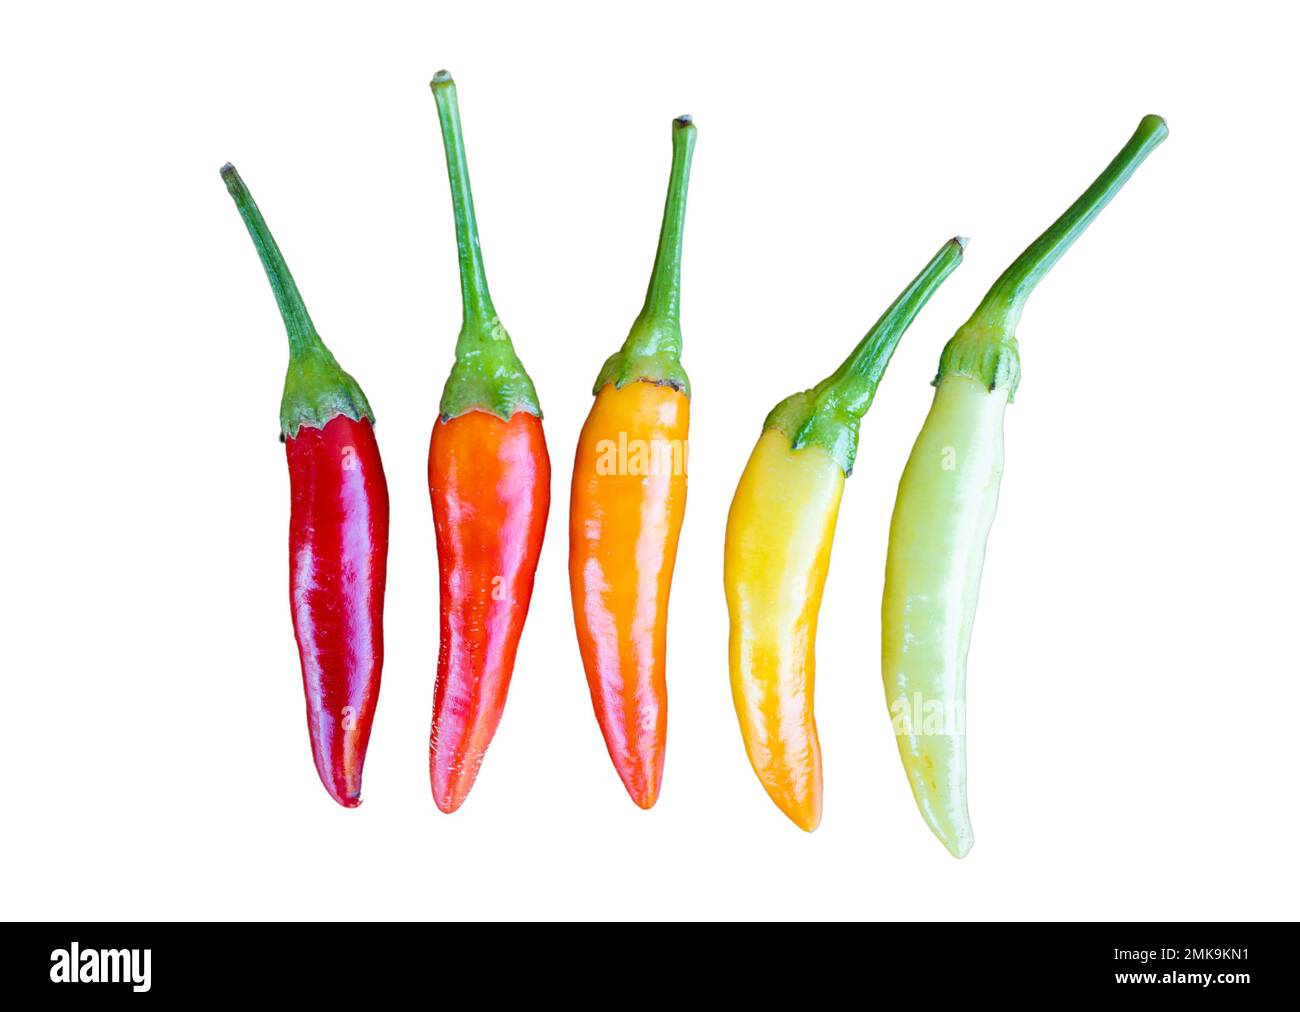 Red and yellow chili cayenne peppers isolated on white Stock Photo